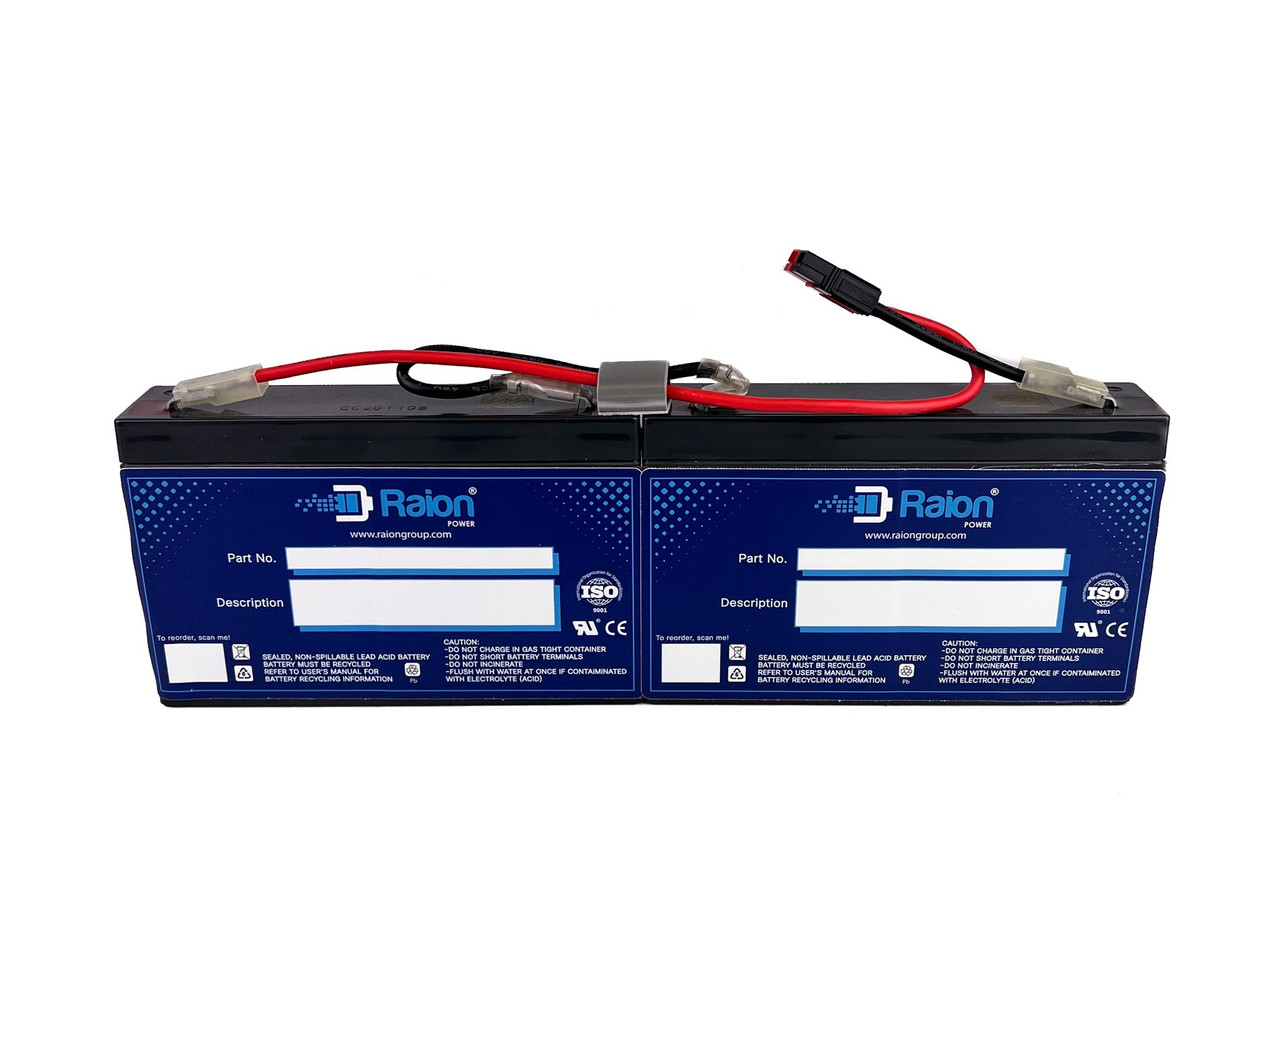 Raion Power Lead Acid Replacement Battery Cartridge for APC Smart-UPS SC 450VA SC450R1X542 w/Network MGMT Card